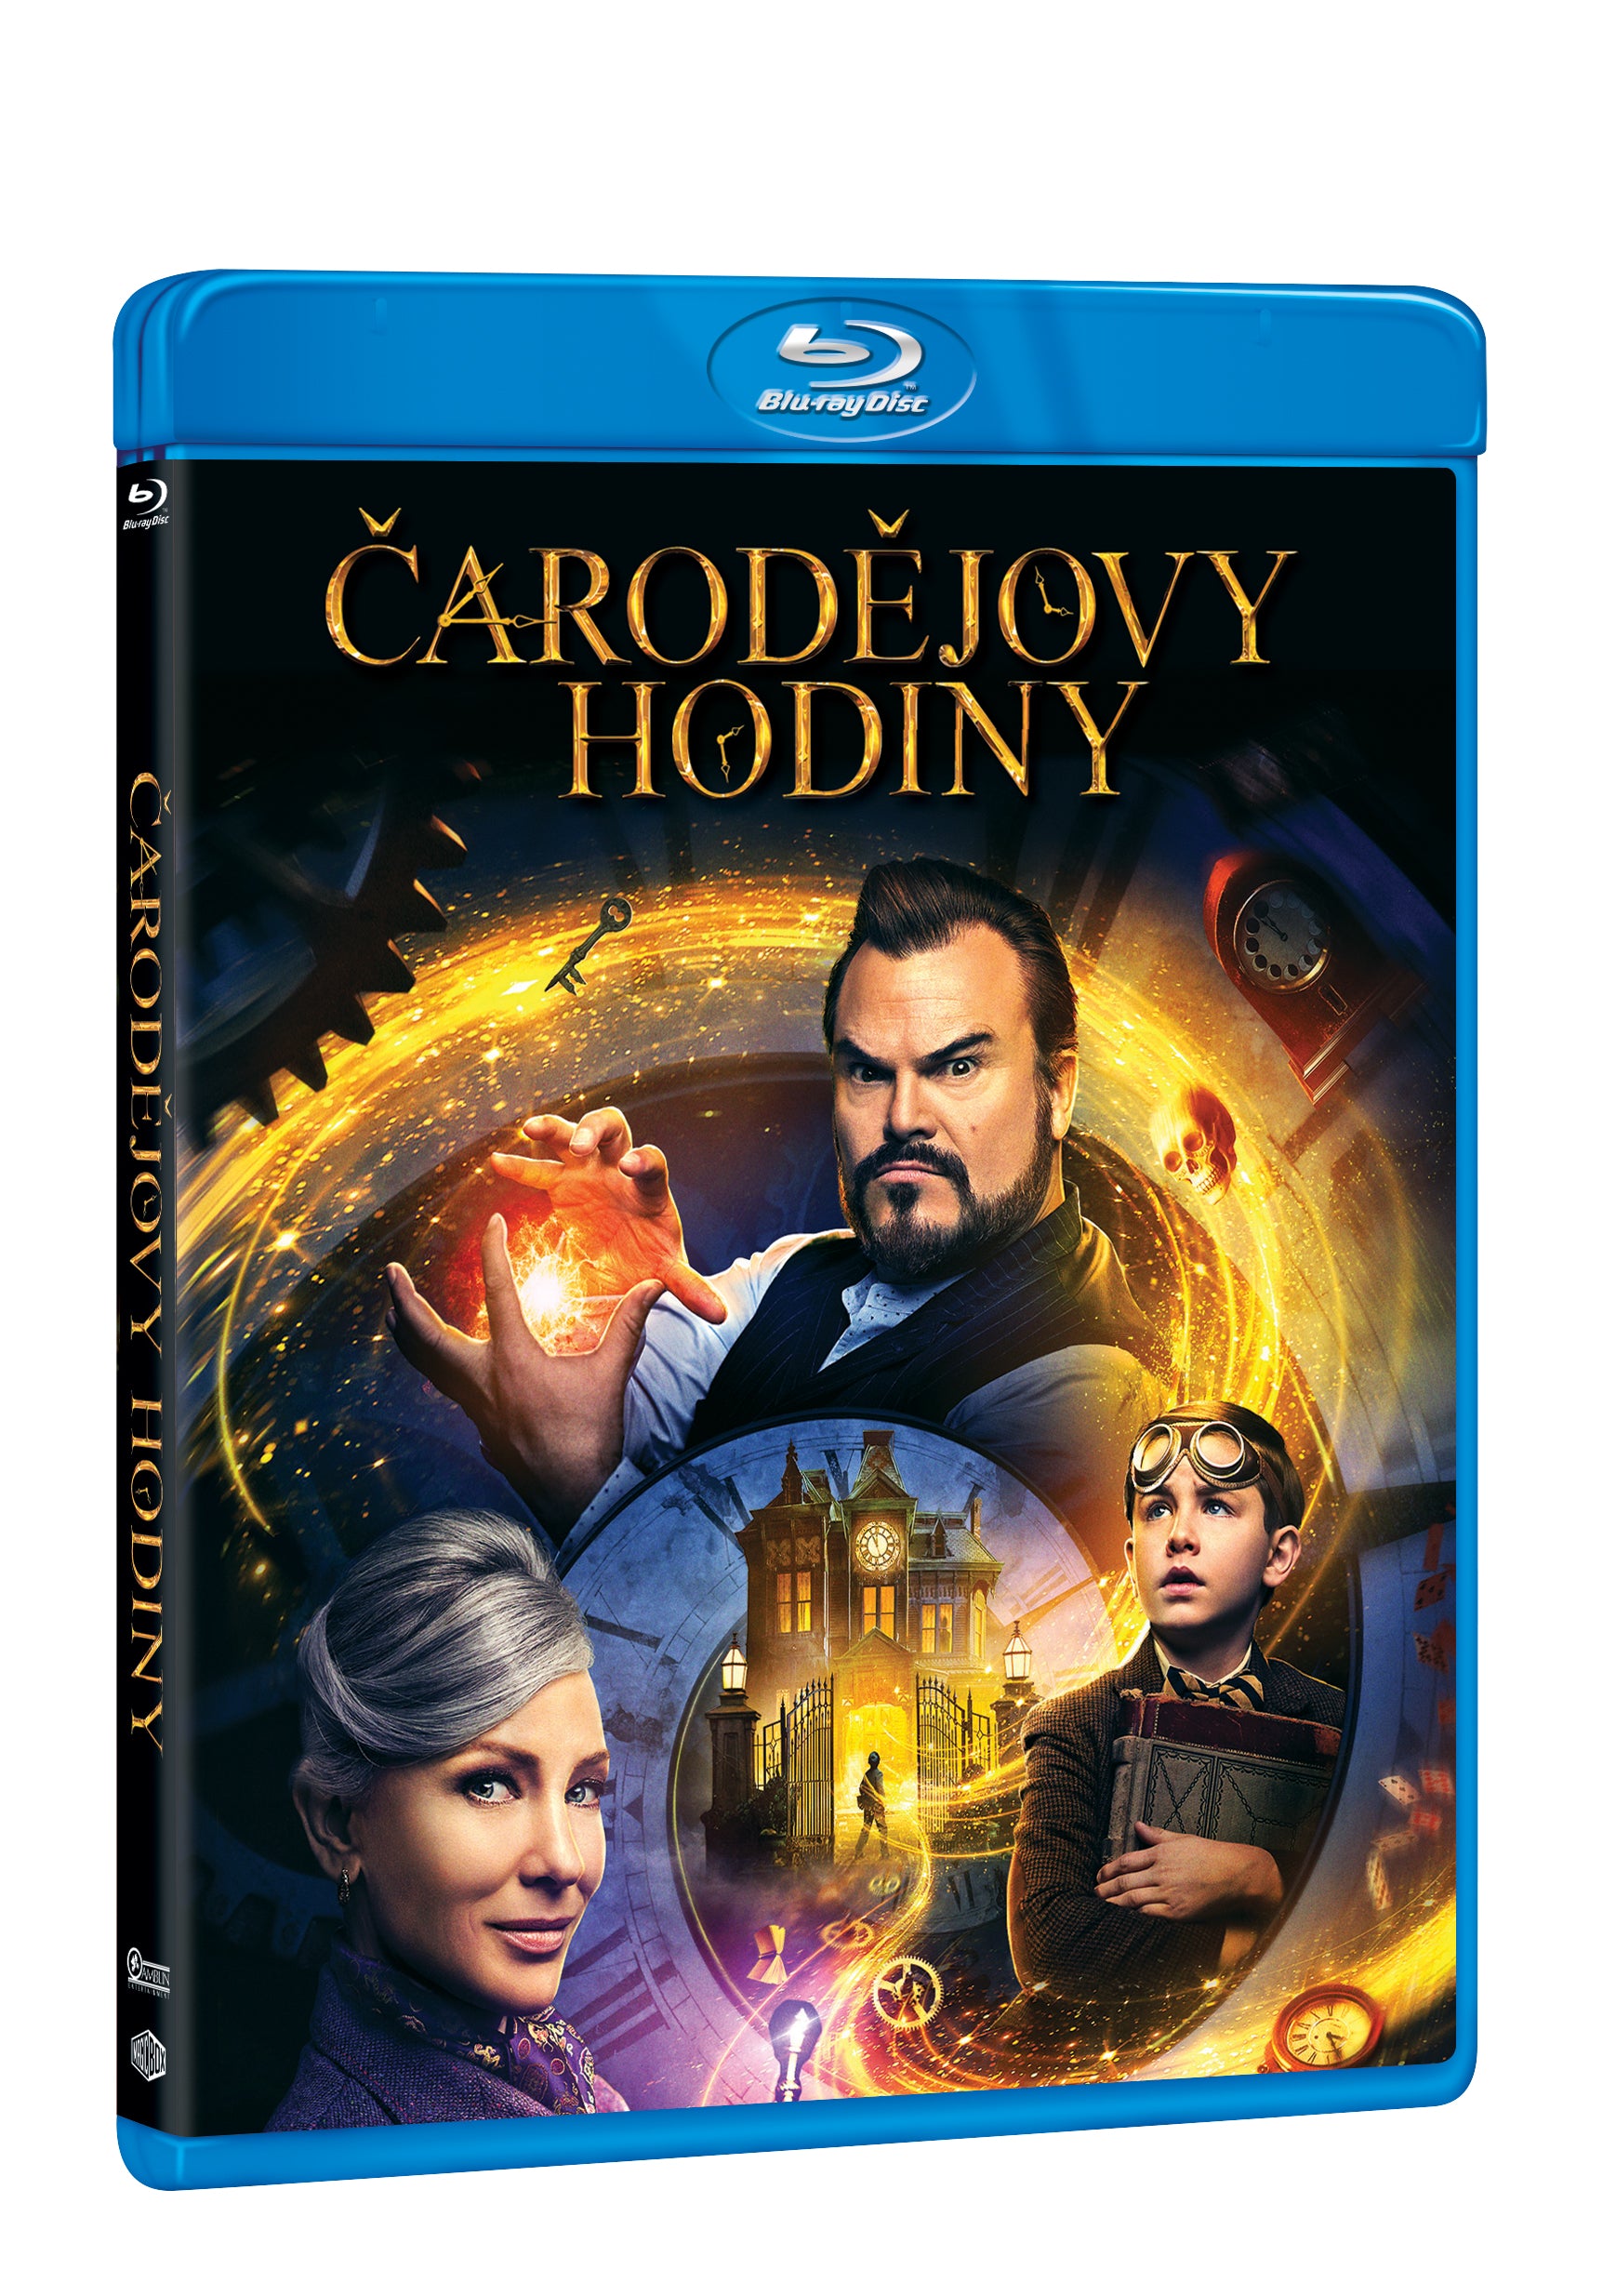 Carodejovy hodiny BD / The House with a Clock in Its Walls - Czech version